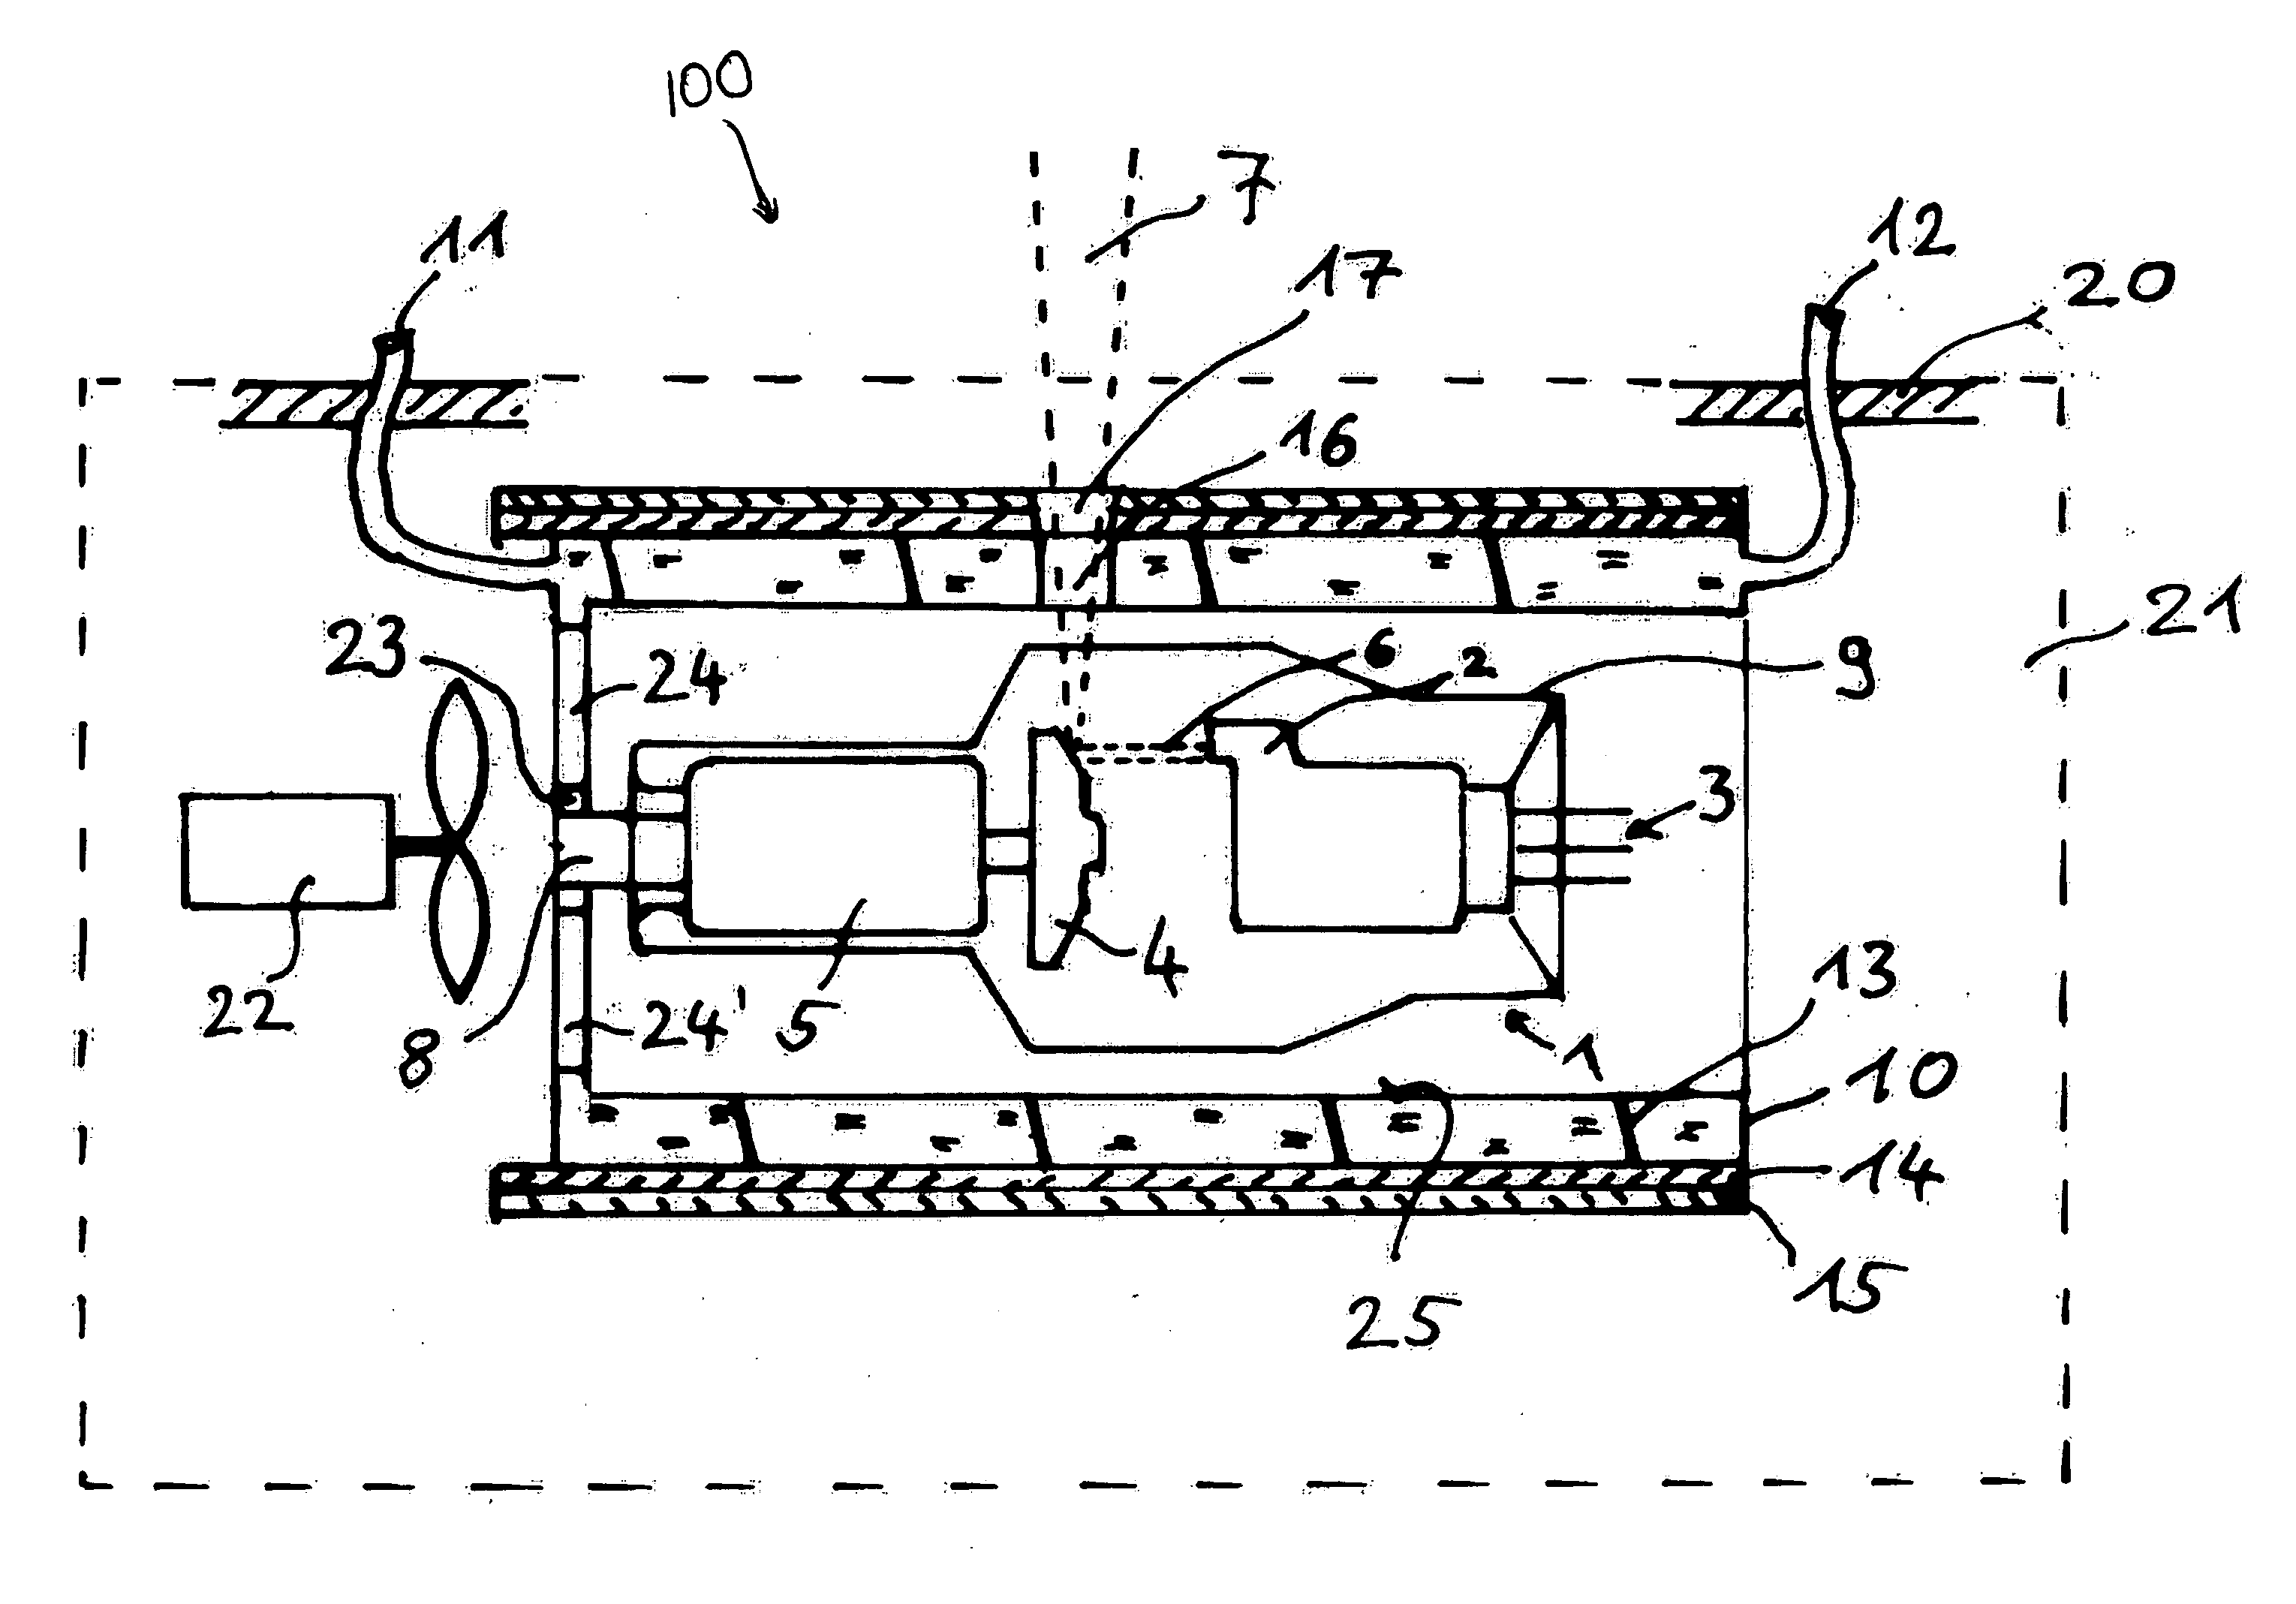 Heat exchanger for a diagnostic x-ray generator with rotary anode-type x-ray tube